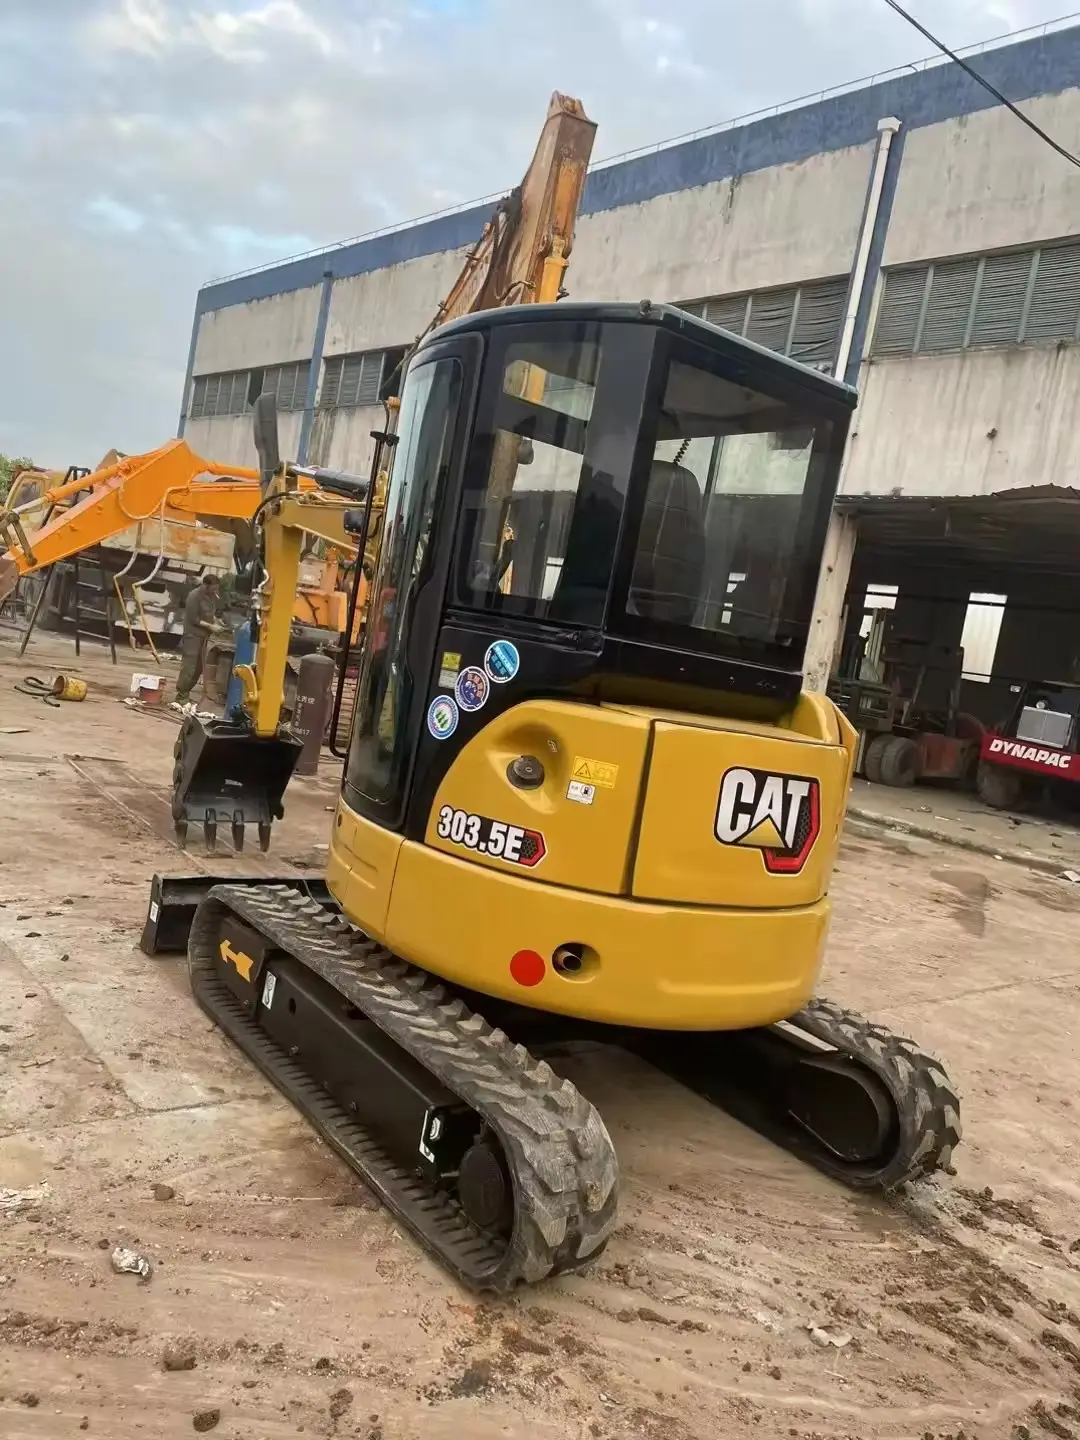 Good Condition Japanese 3TonMini Digger Used Caterpillar Cat303.5E Hydraulic Excavator for sale